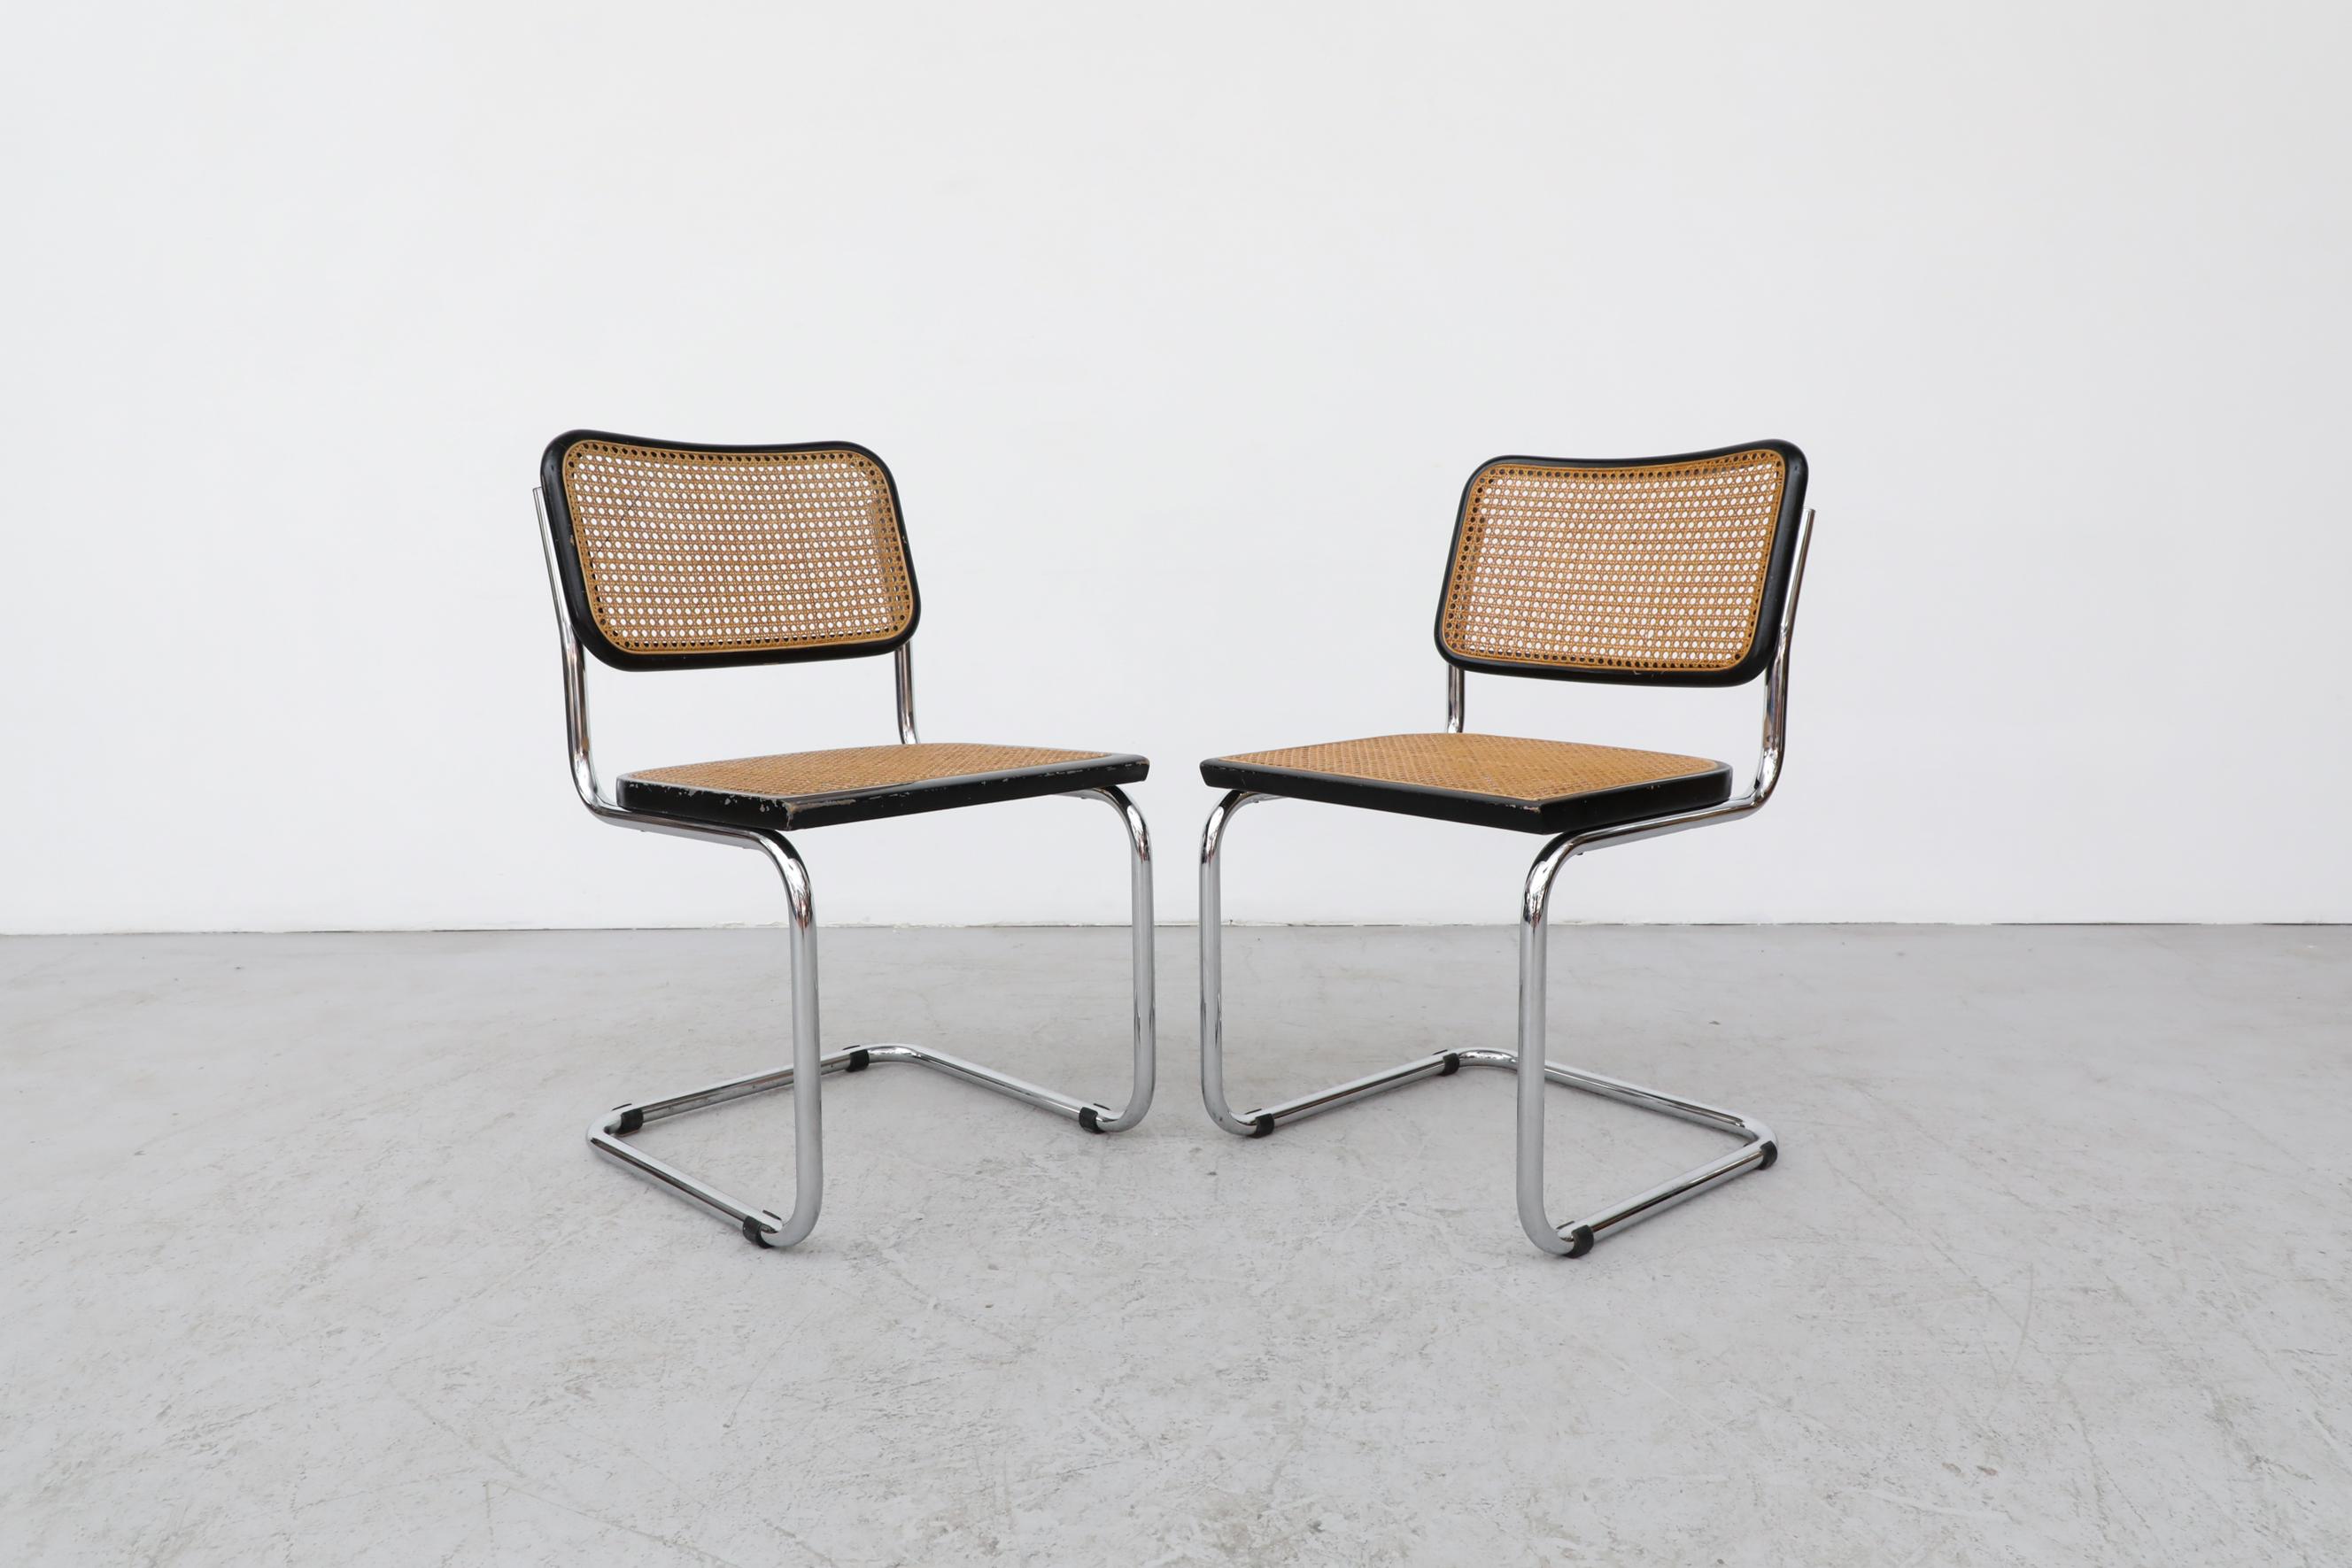 Iconic set of Marcel Breuer B32 Cesca chairs featuring a cantilevered chrome-plated steel frame, an ebonized lacquered beech finish, and cane seat. All are in original condition with visible wear and patina. Some have heavy chrome loss to the frame.